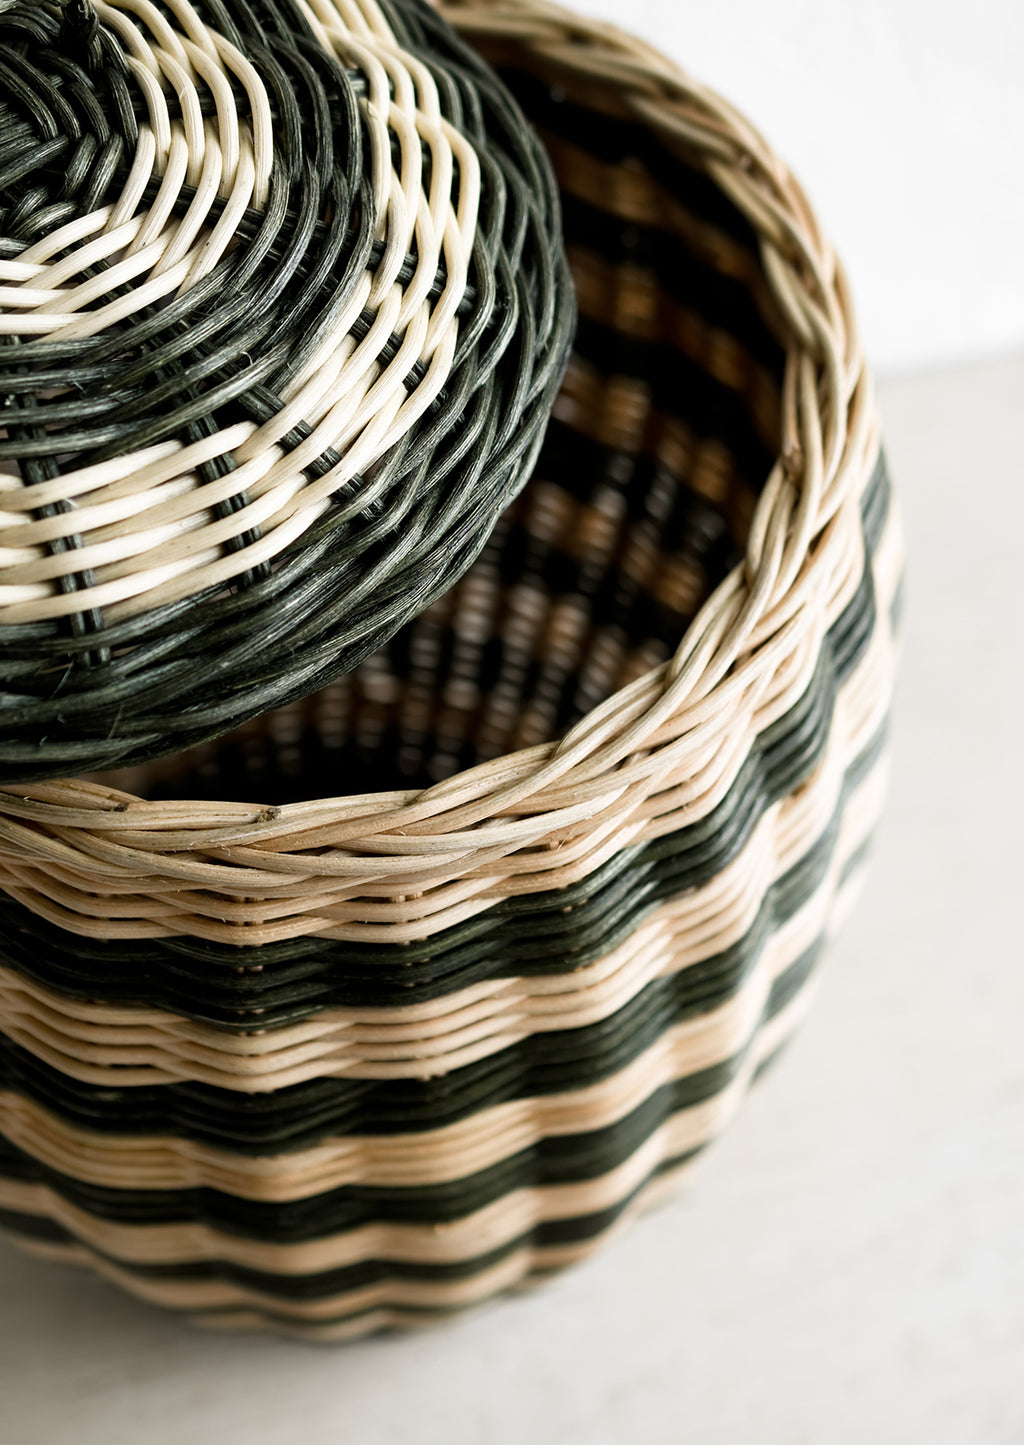 2: A tall hive shaped lidded basket in natural and dark green stripes.